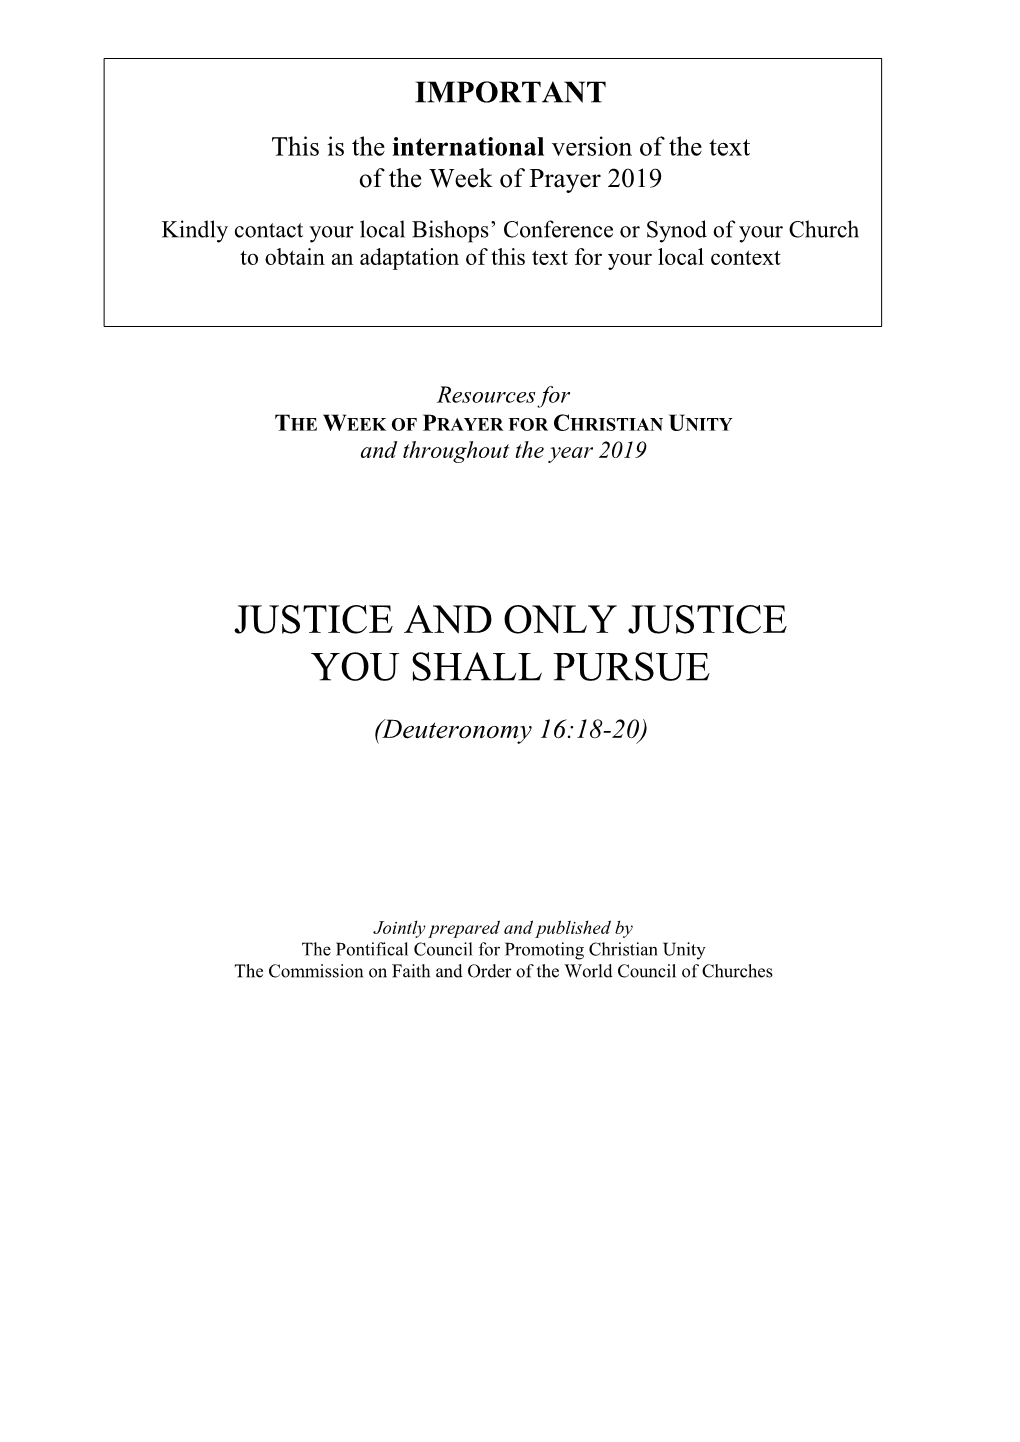 Justice and Only Justice You Shall Pursue